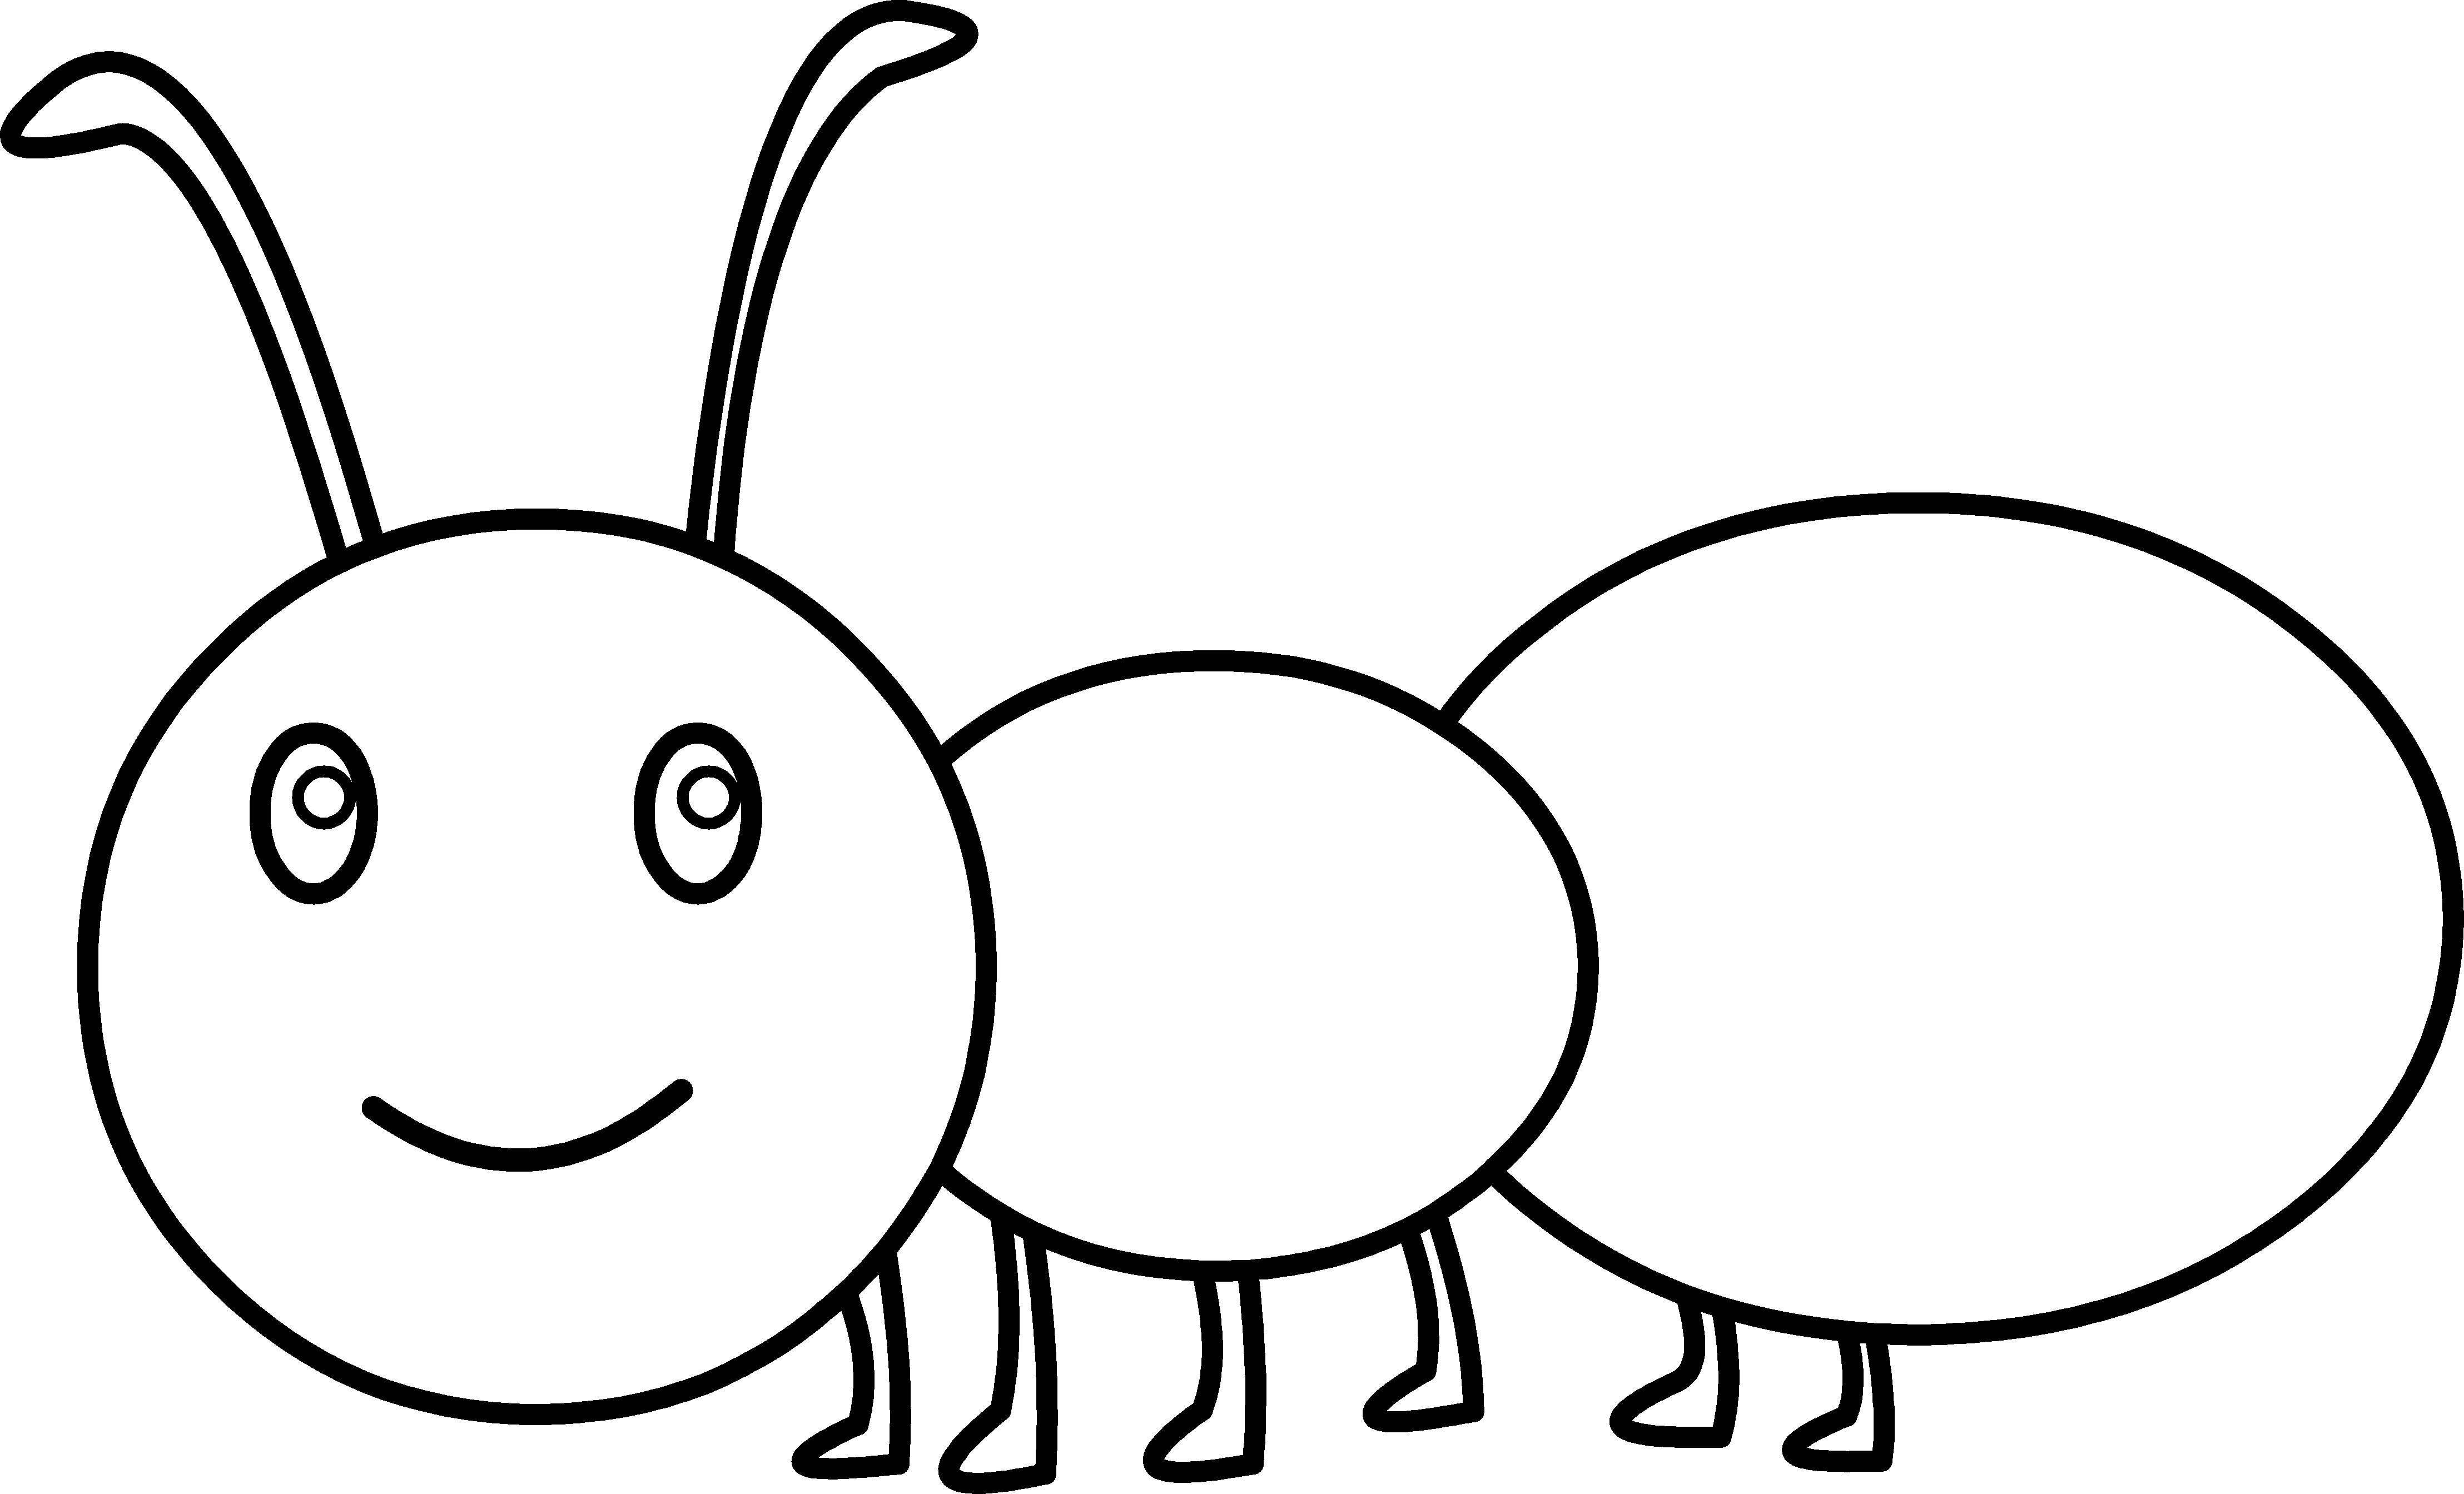 Ants clipart colouring page. Cute ant coloring free